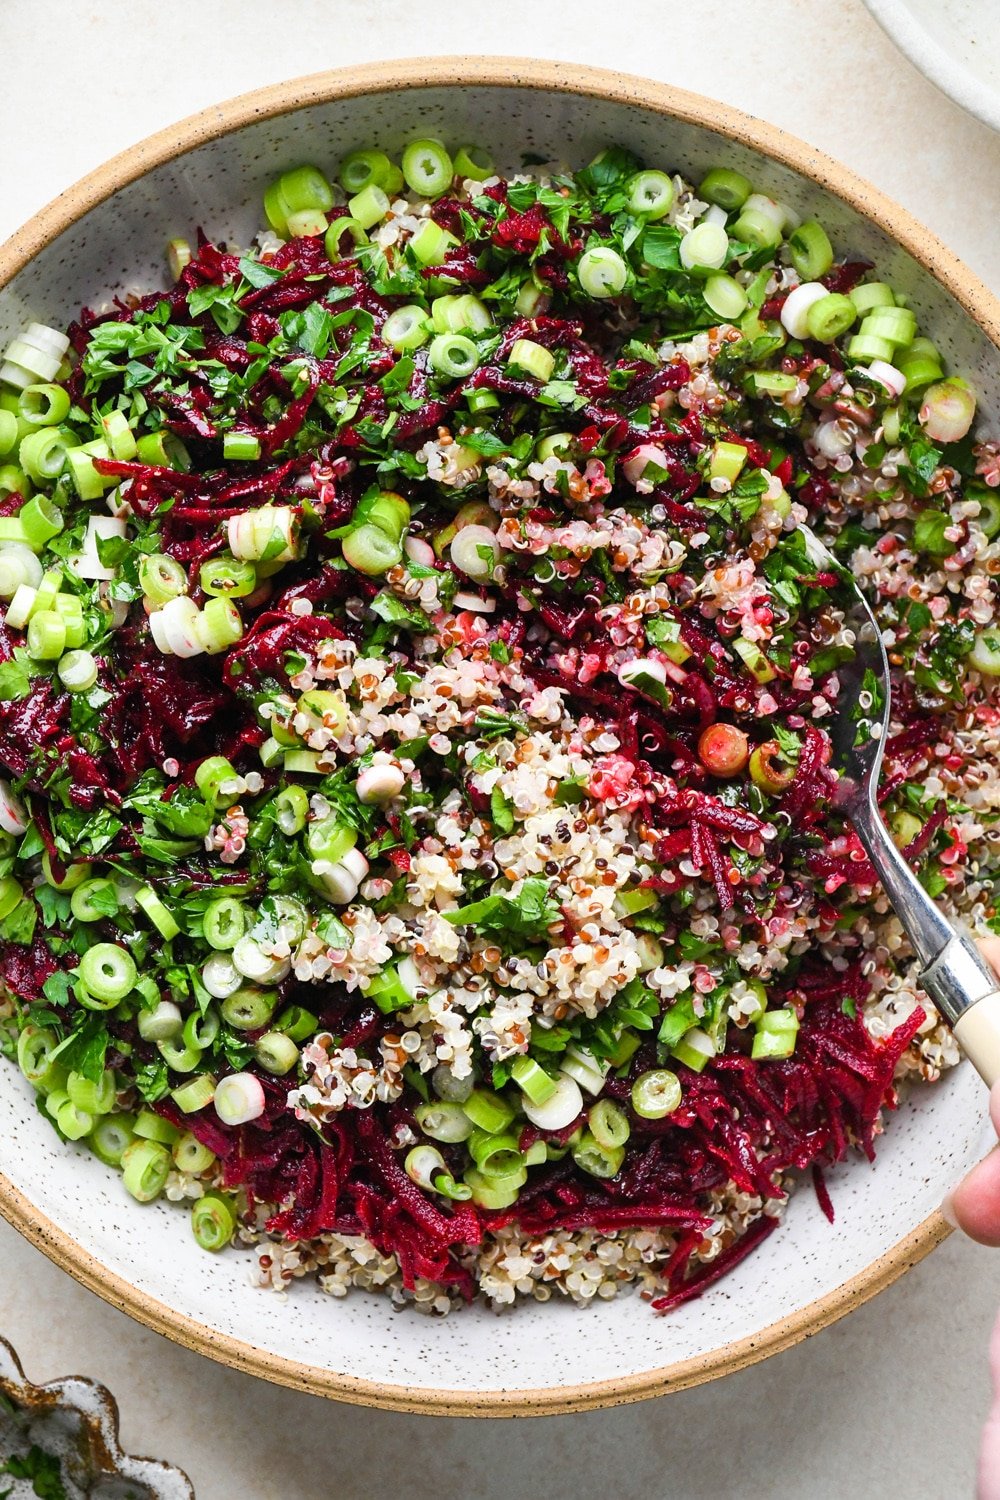 How to make quinoa and fresh beet salad: A large spoon mixing together quinoa salad.